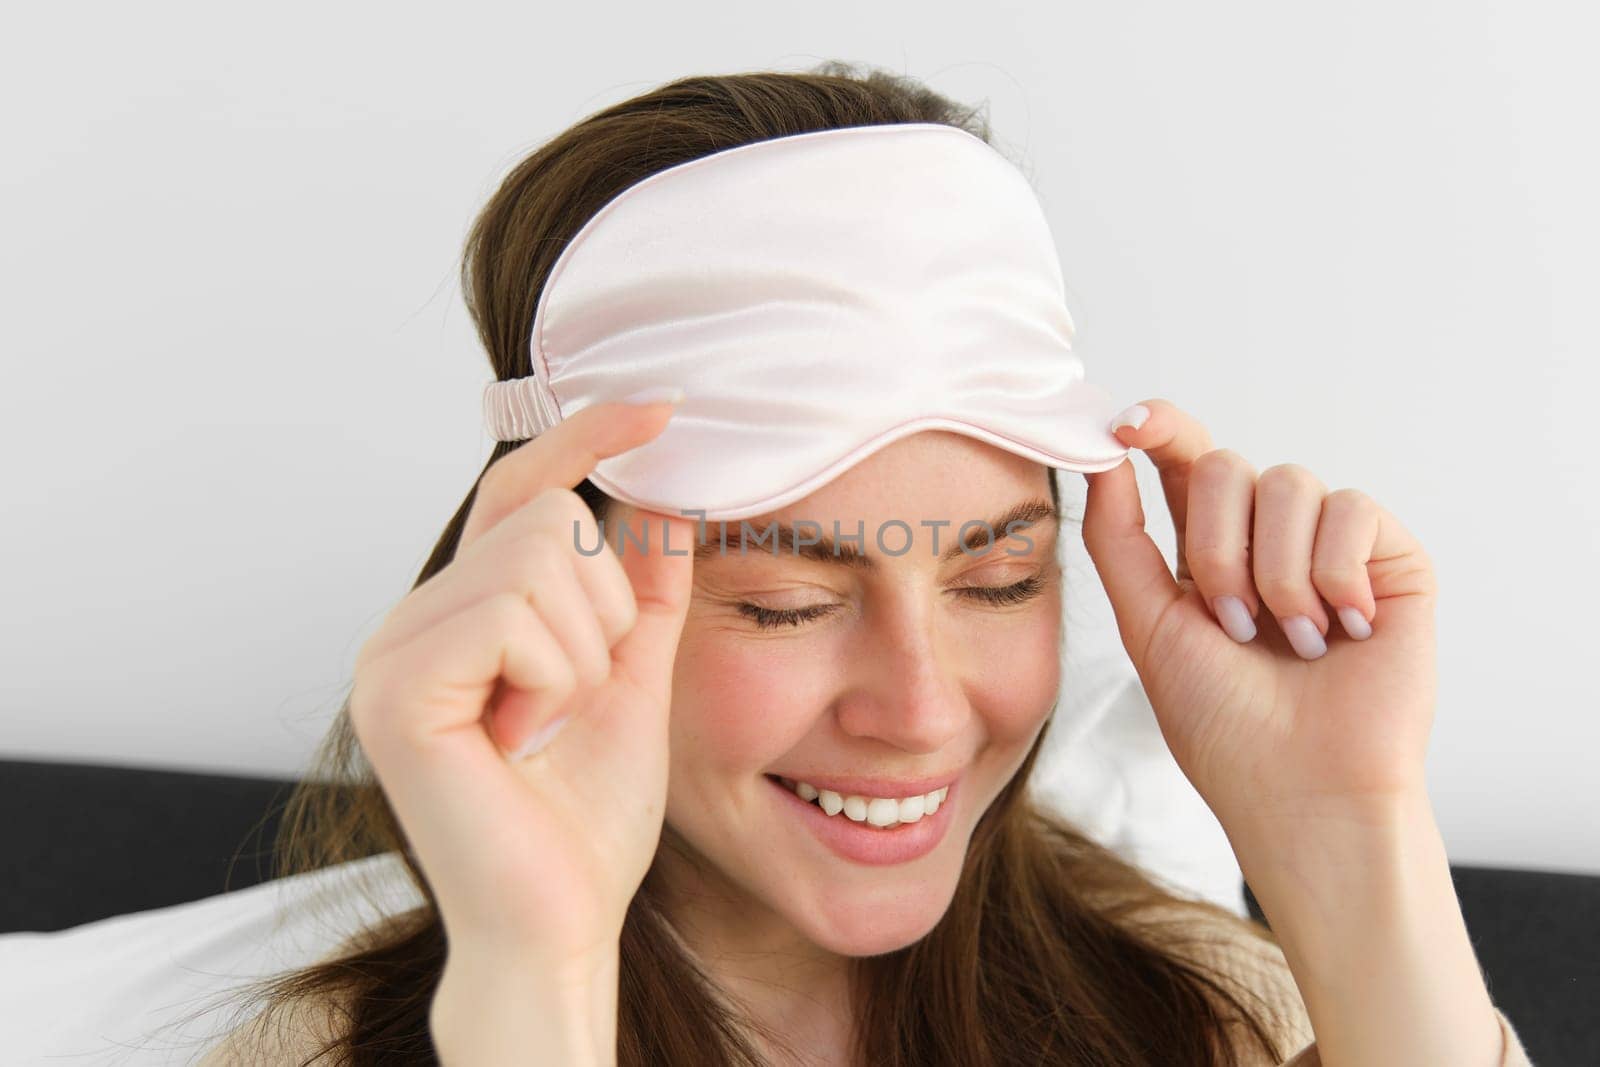 Close up portrait of gorgeous smiling woman with sleeping mask on forehead, waking up in morning, relaxing in bed, laughing and looking happy, resting on vacation in hotel room.